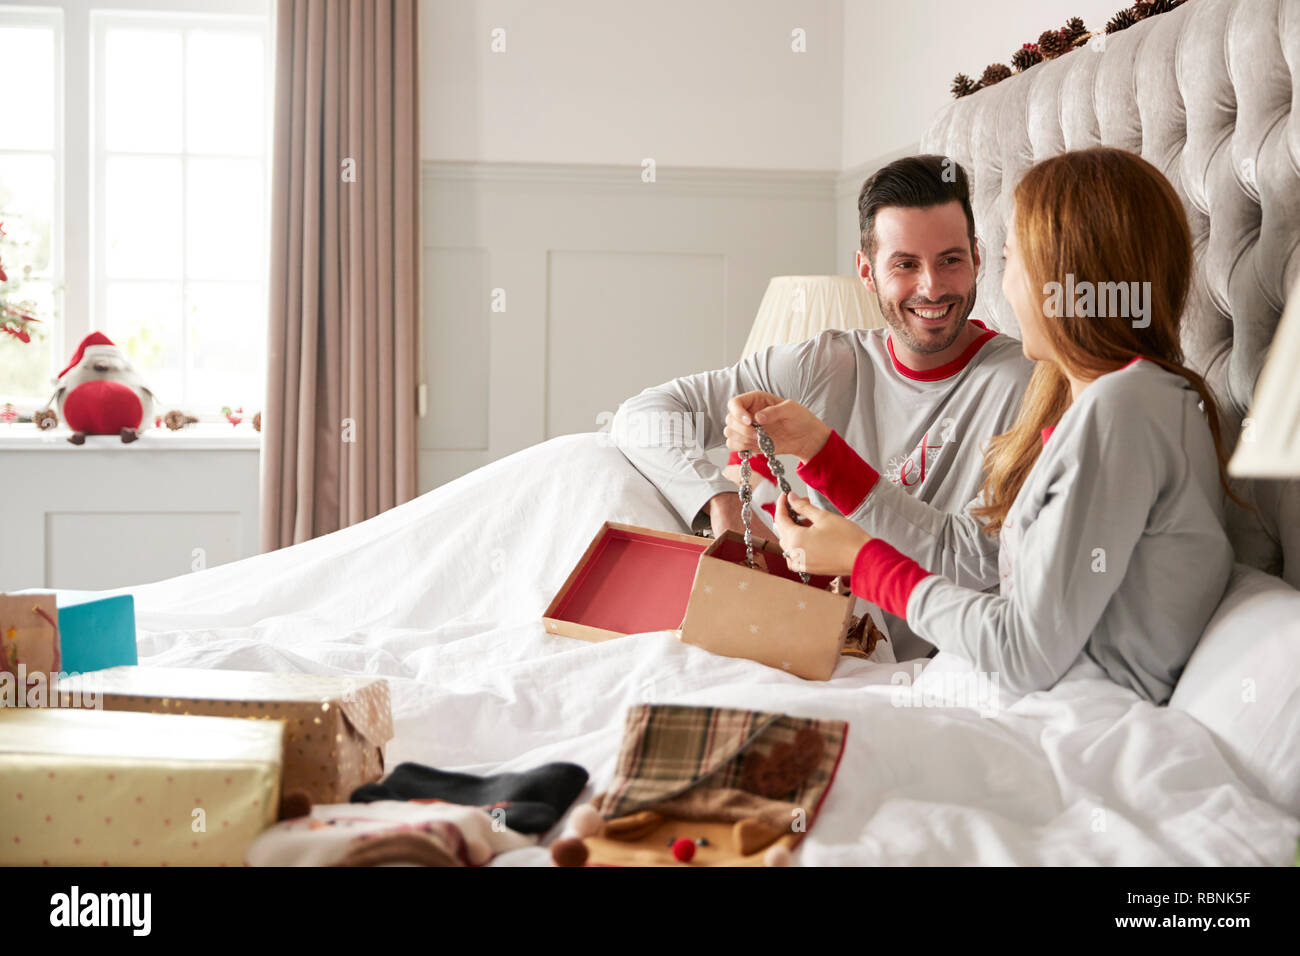 Woman Opening Gift Of Necklace In Bed At Home As Couple Exchange Presents On Christmas Day Stock Photo